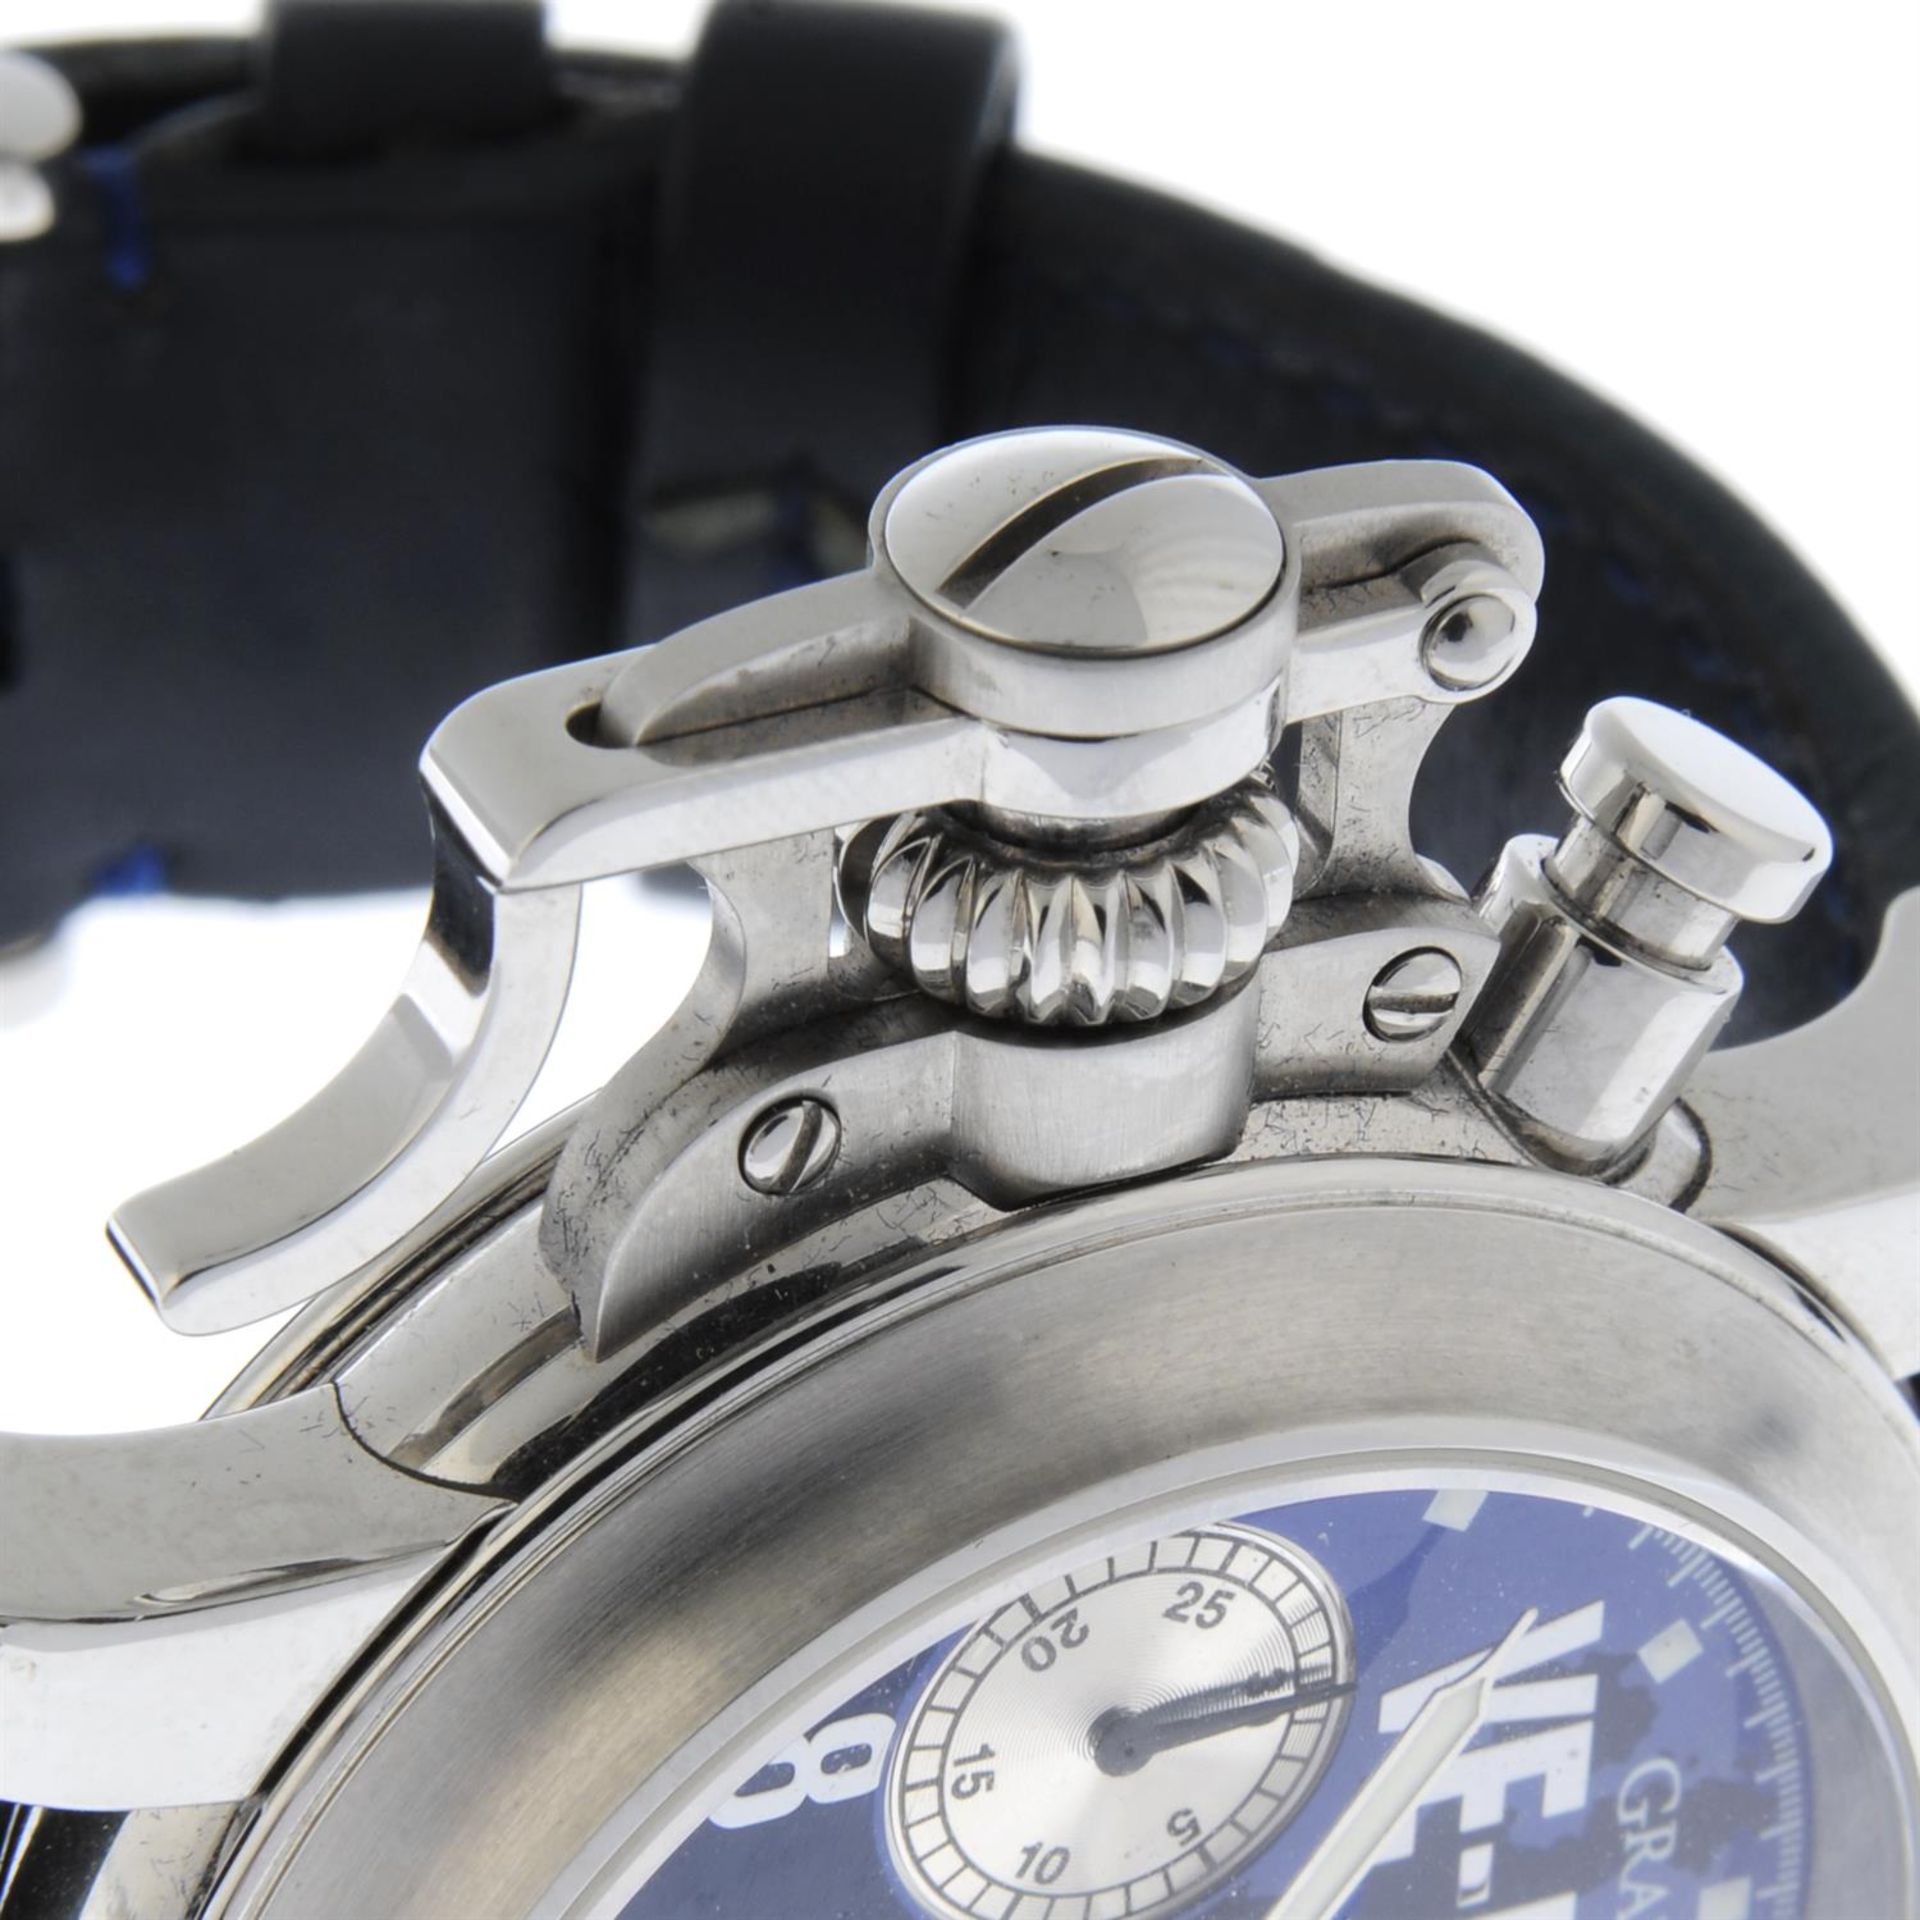 GRAHAM - a limited edition stainless steel Chronofighter 'VE-DAY' wrist watch, 41mm. - Image 4 of 6